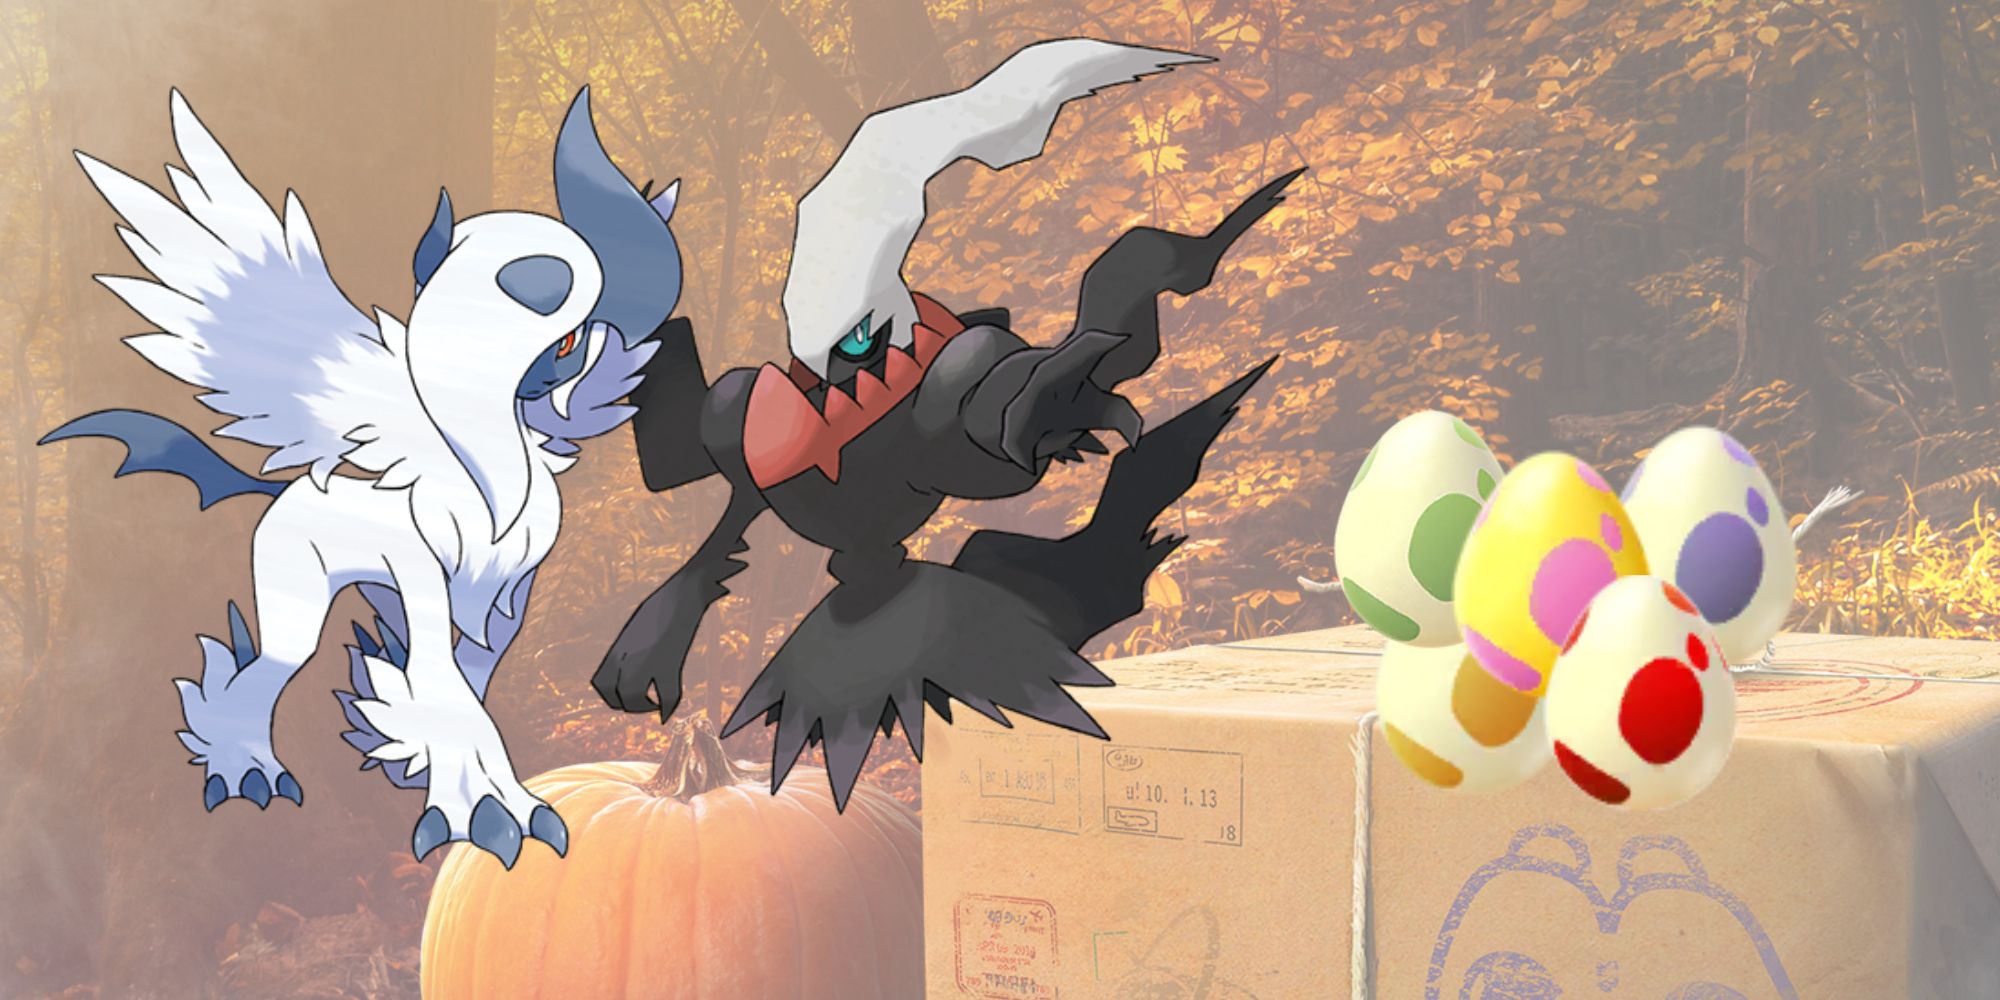 This Week In Pokemon Go Mega Absol QoL Improvements And More